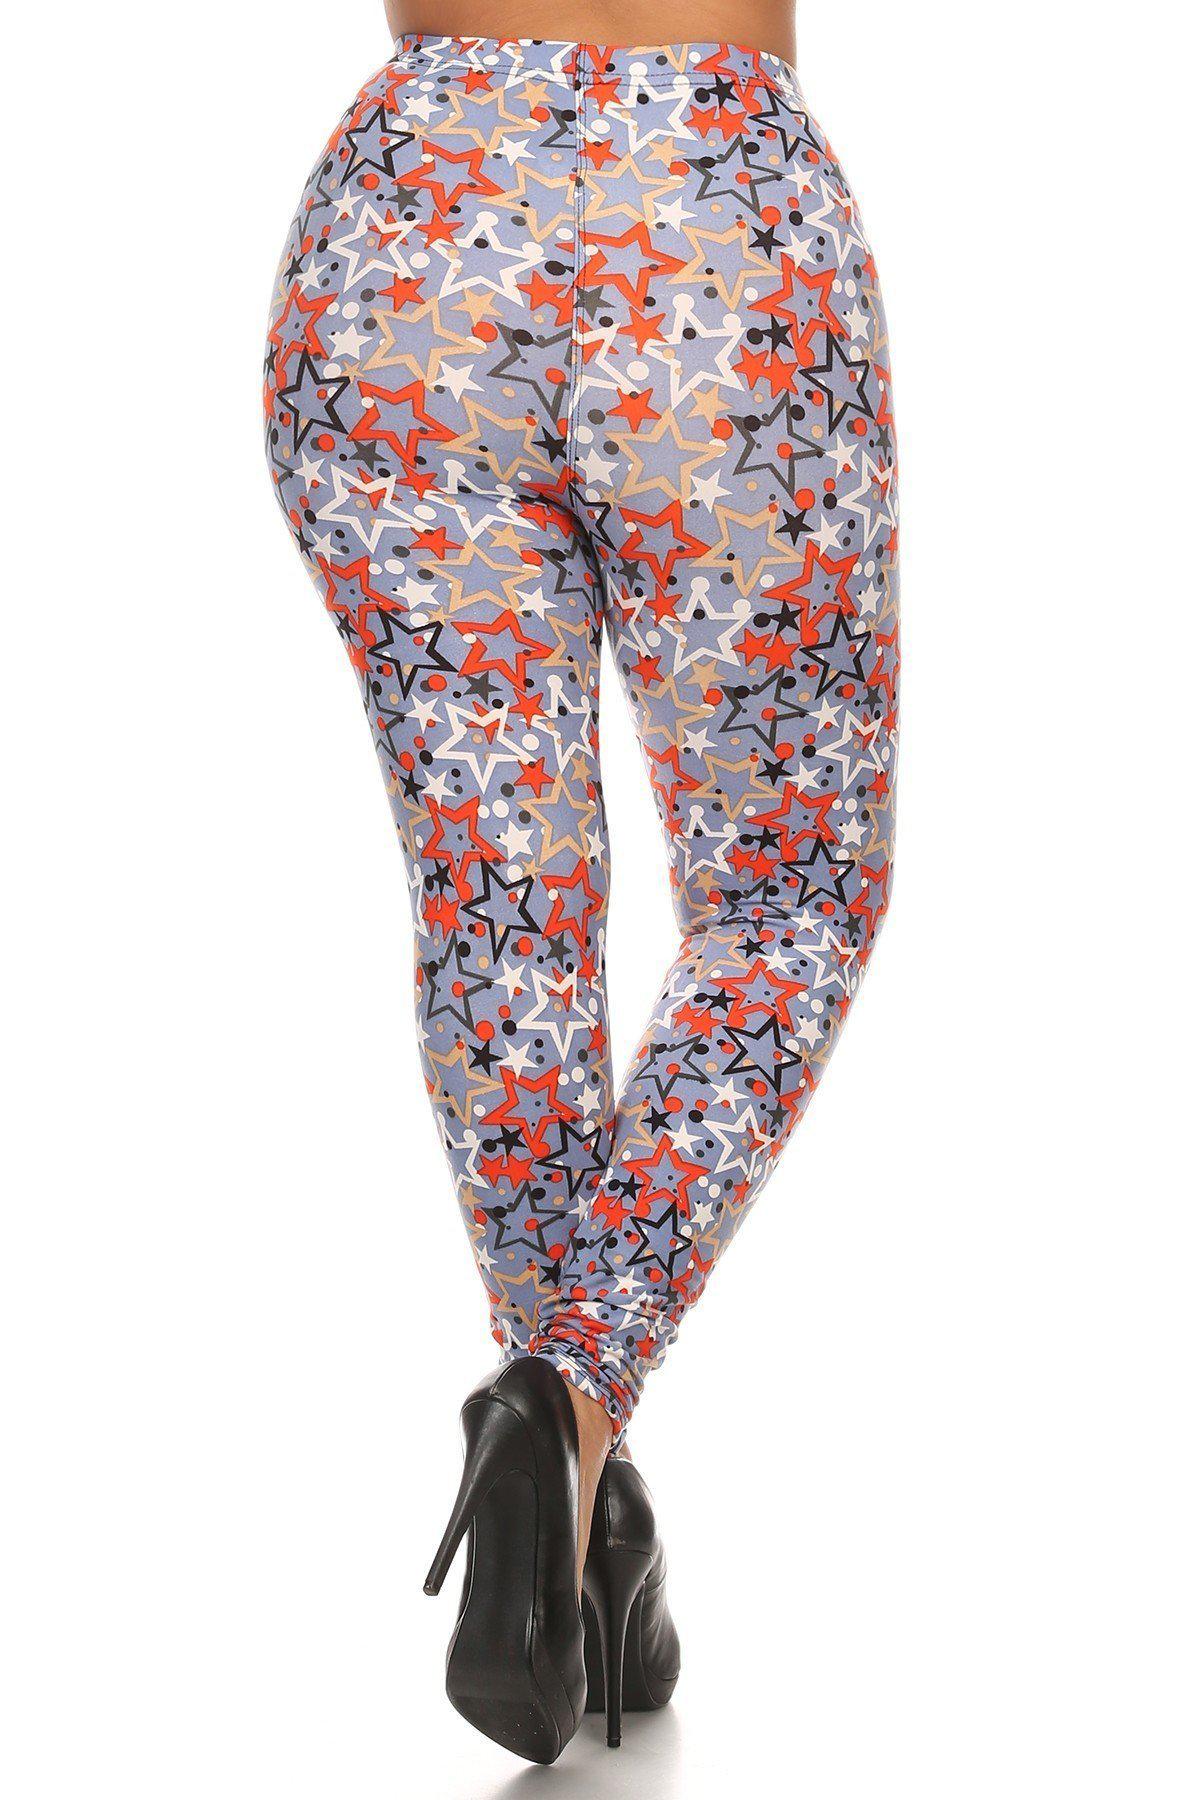 Plus Size Star Print, Full Length Leggings In A Slim Fitting Style With A Banded High Waist-[Adult]-[Female]-Multi-Blue Zone Planet